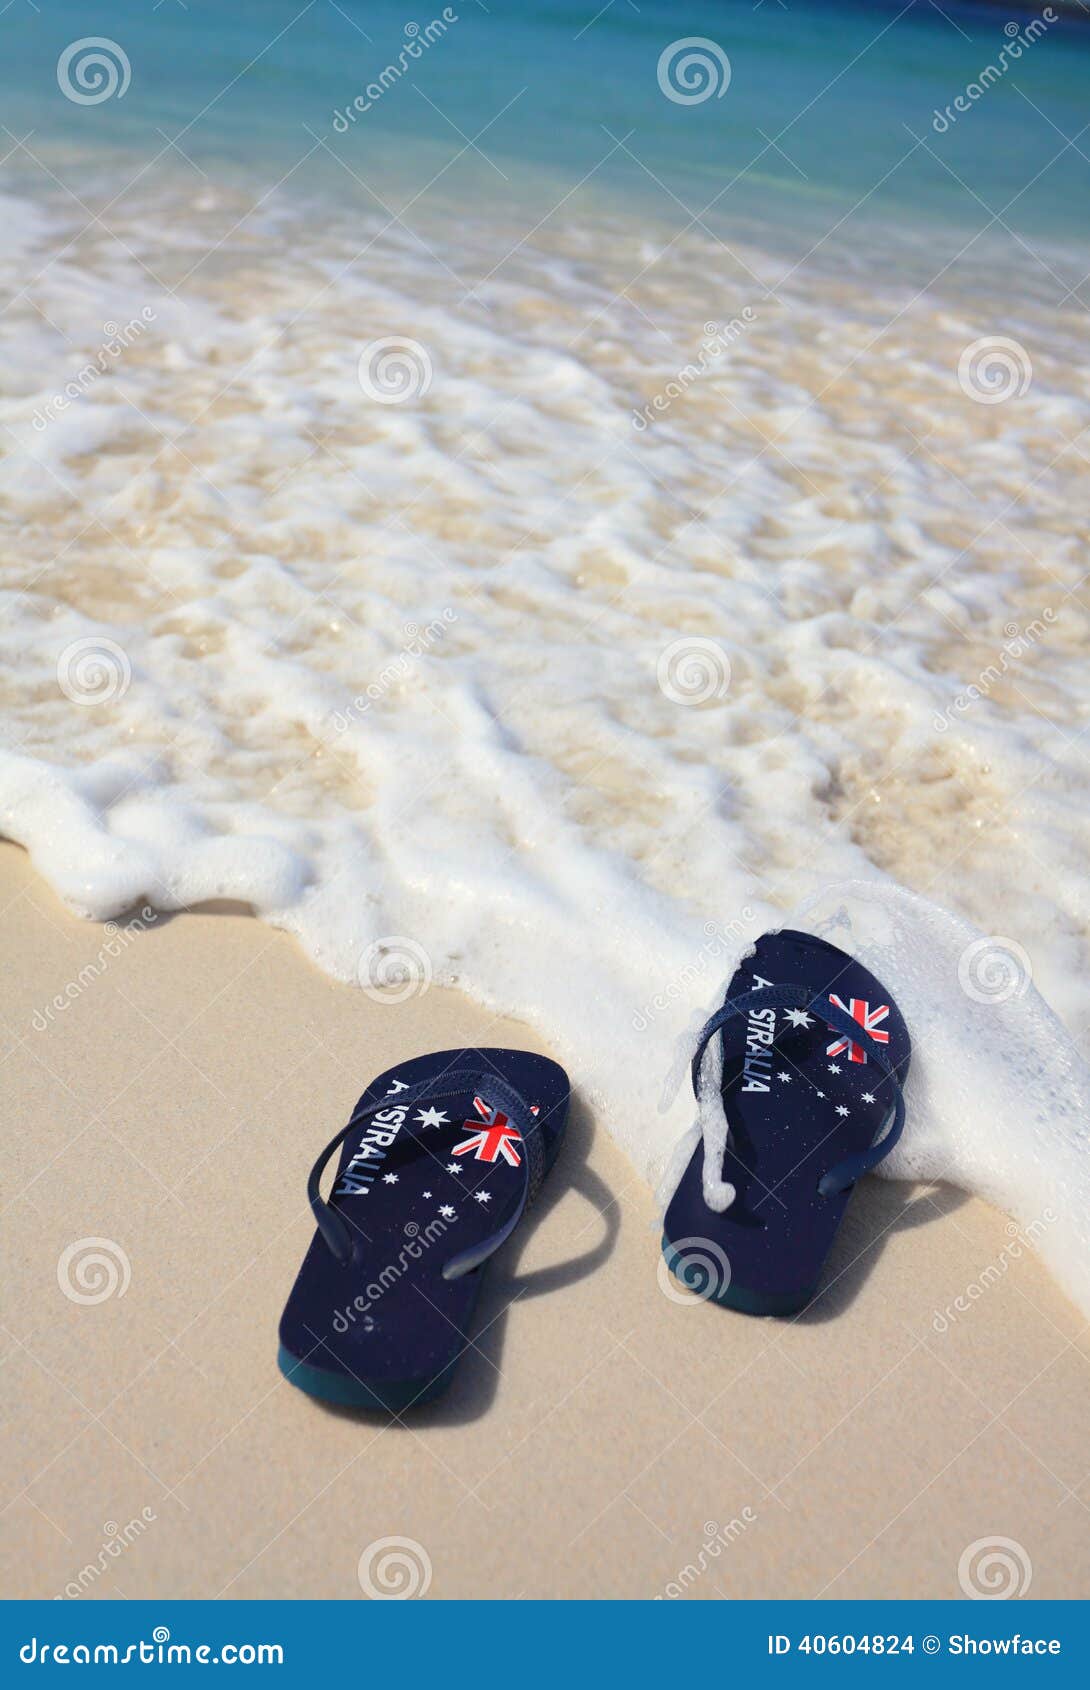 Aussie Thongs On On The Beach Holiday Stock Photo - Image: 40604824